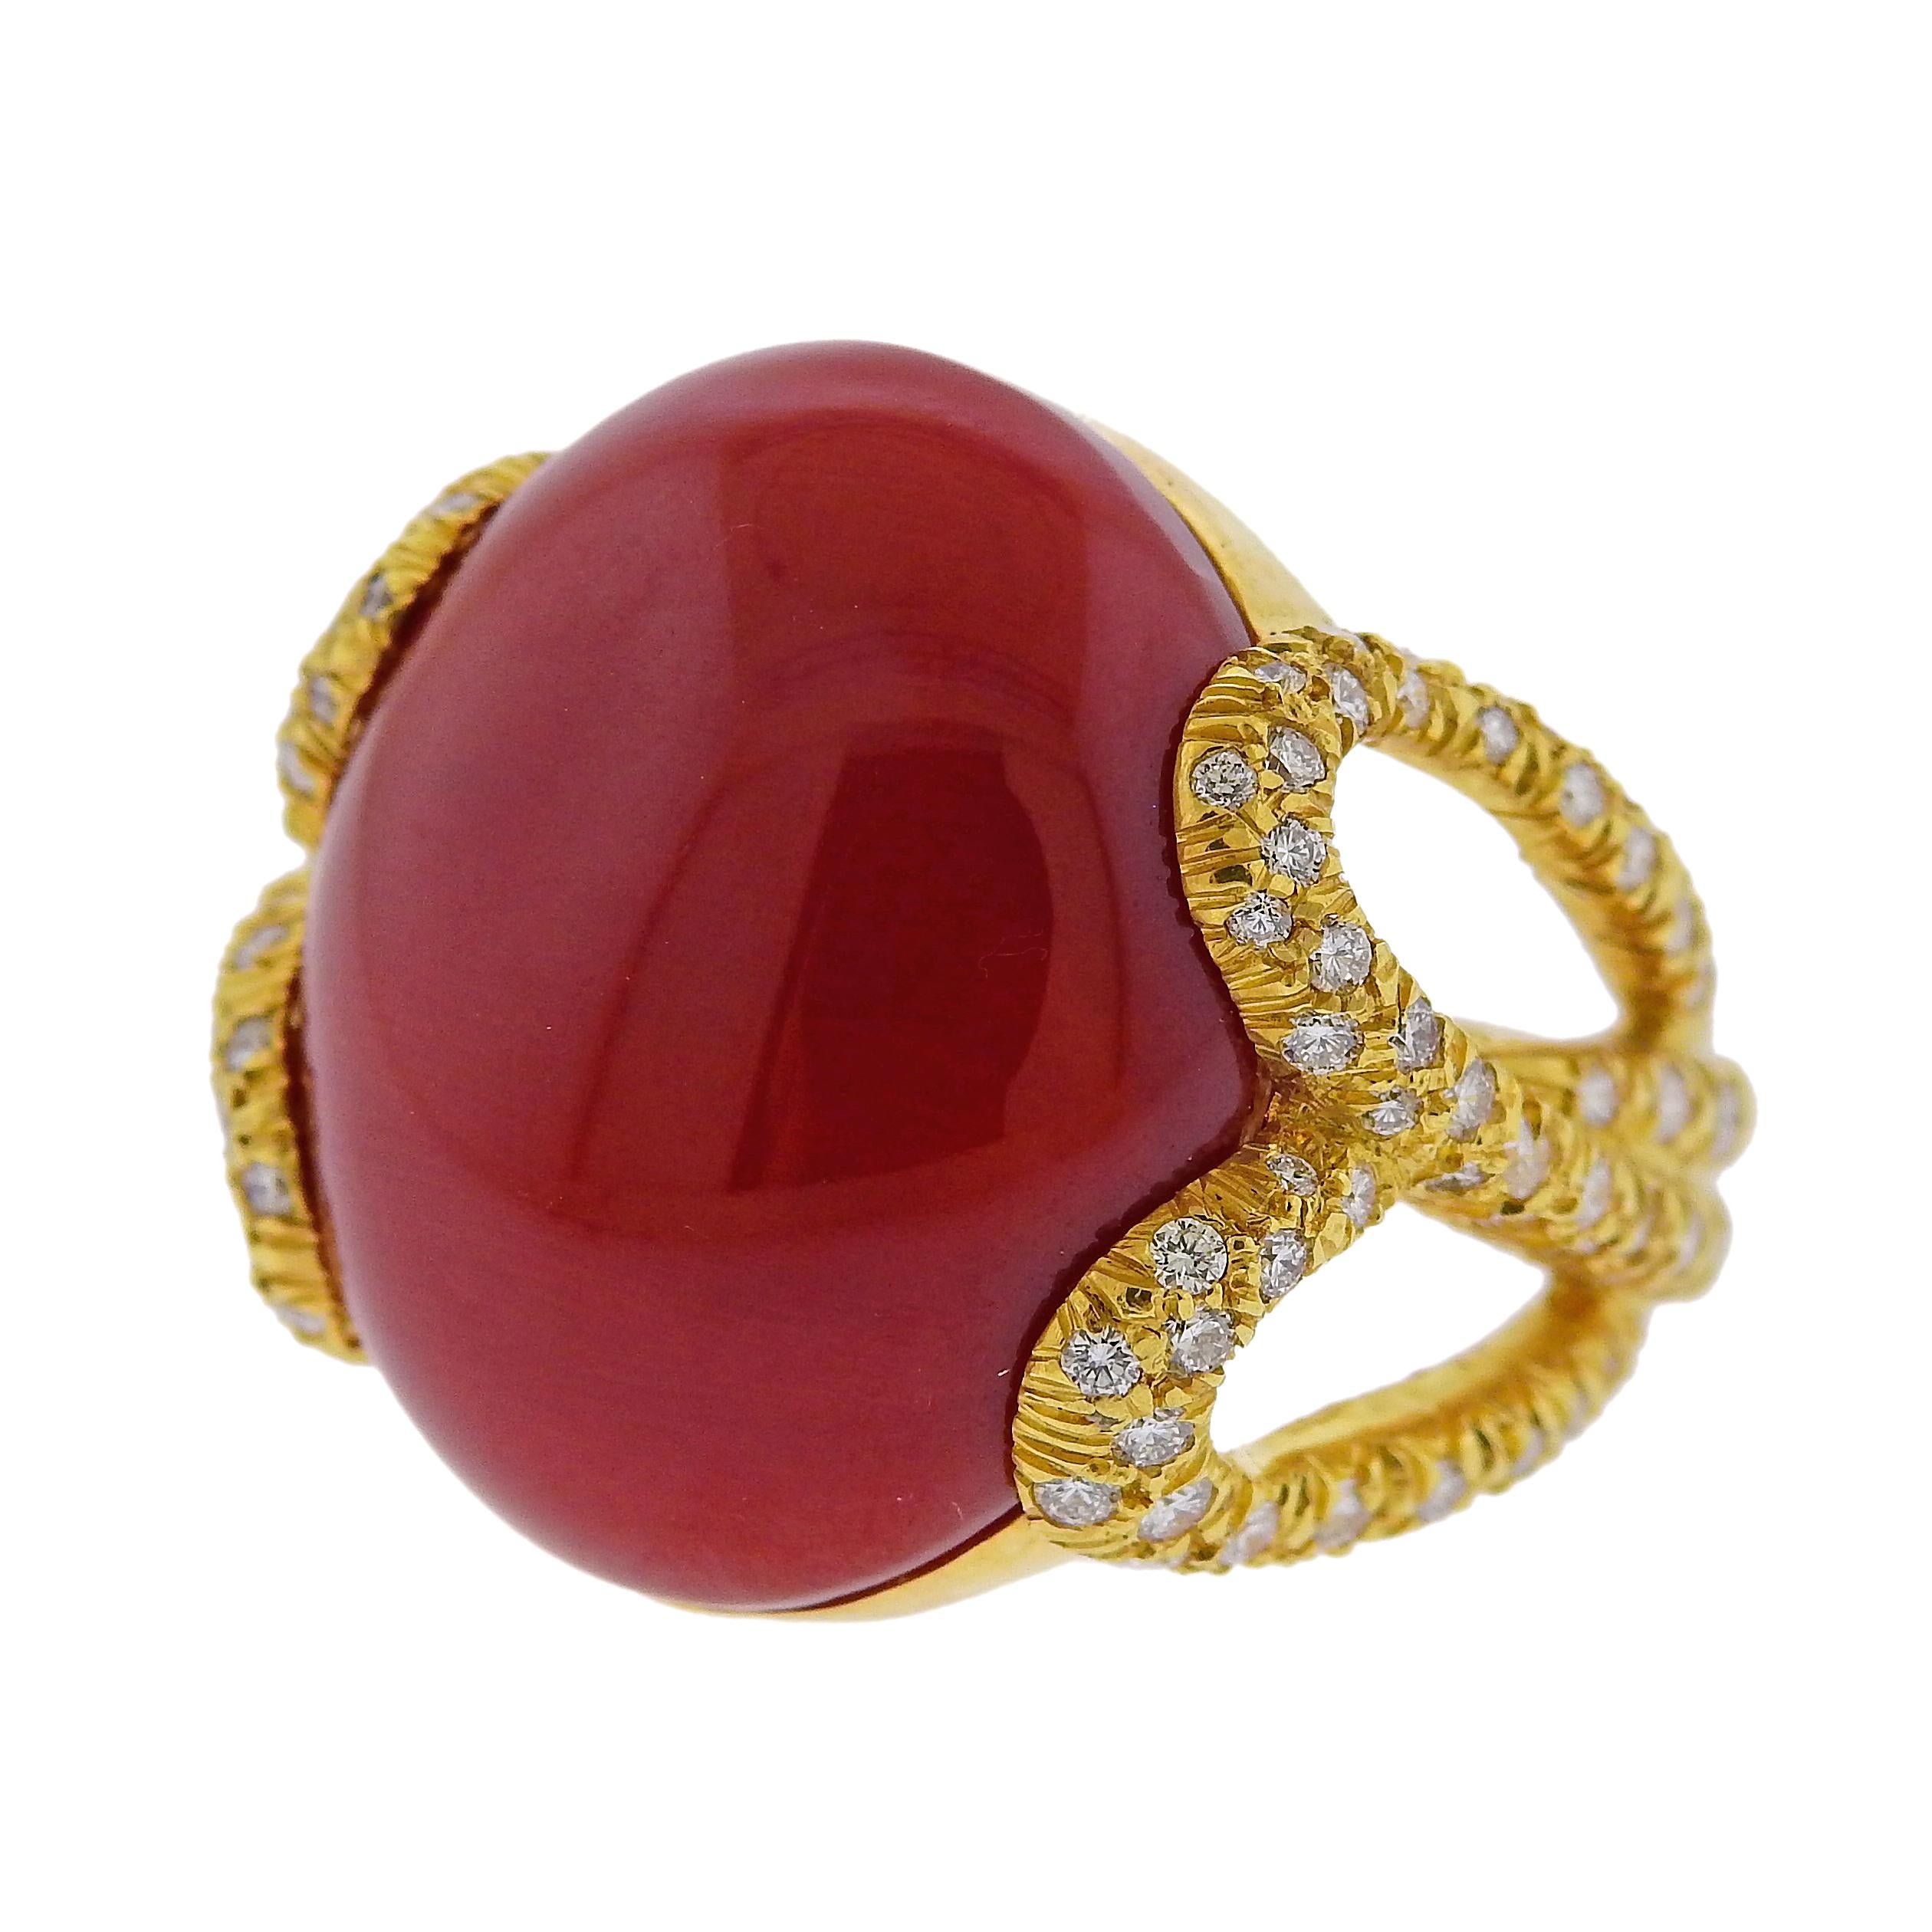 Beautiful 18k yellow gold ring by Henry Dunay, set with a 21mm x 18mm oxblood red coral, surrounded with approx. 0.80ctw in G/VS diamonds. Ring size is 6.5, ring top of the ring is 21mm wide. Weight: 16.1 grams. Marked: Dunay, 18kt, 750, E2826.